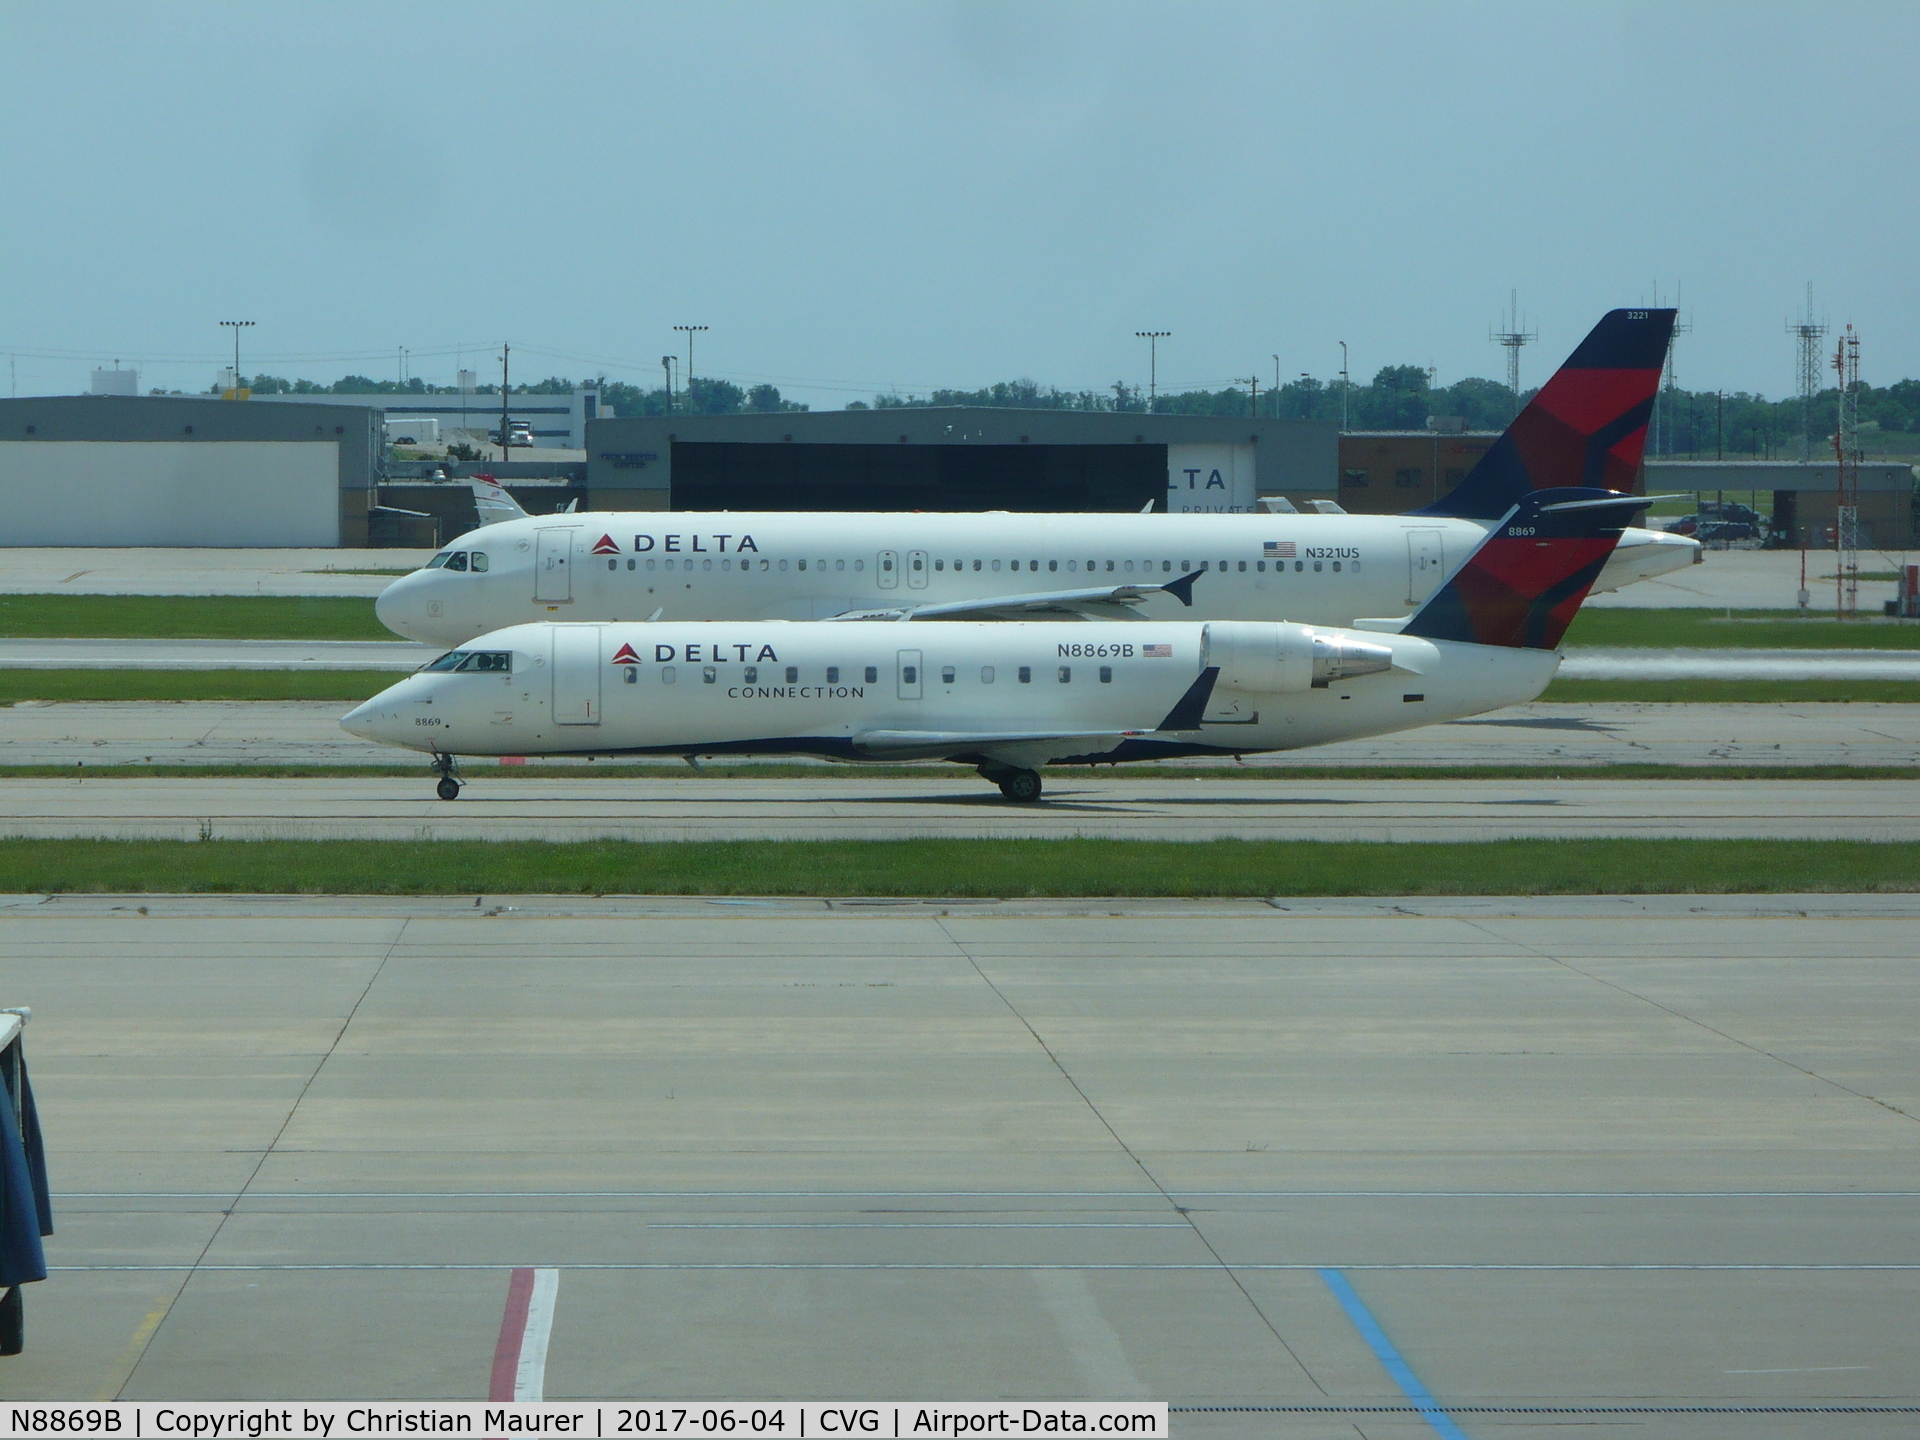 N8869B, 2003 Canadair CRJ-440 (CL-600-2B19) Regional Jet C/N 7869, CRJ-440 infront of 321US after a rejected takeoff